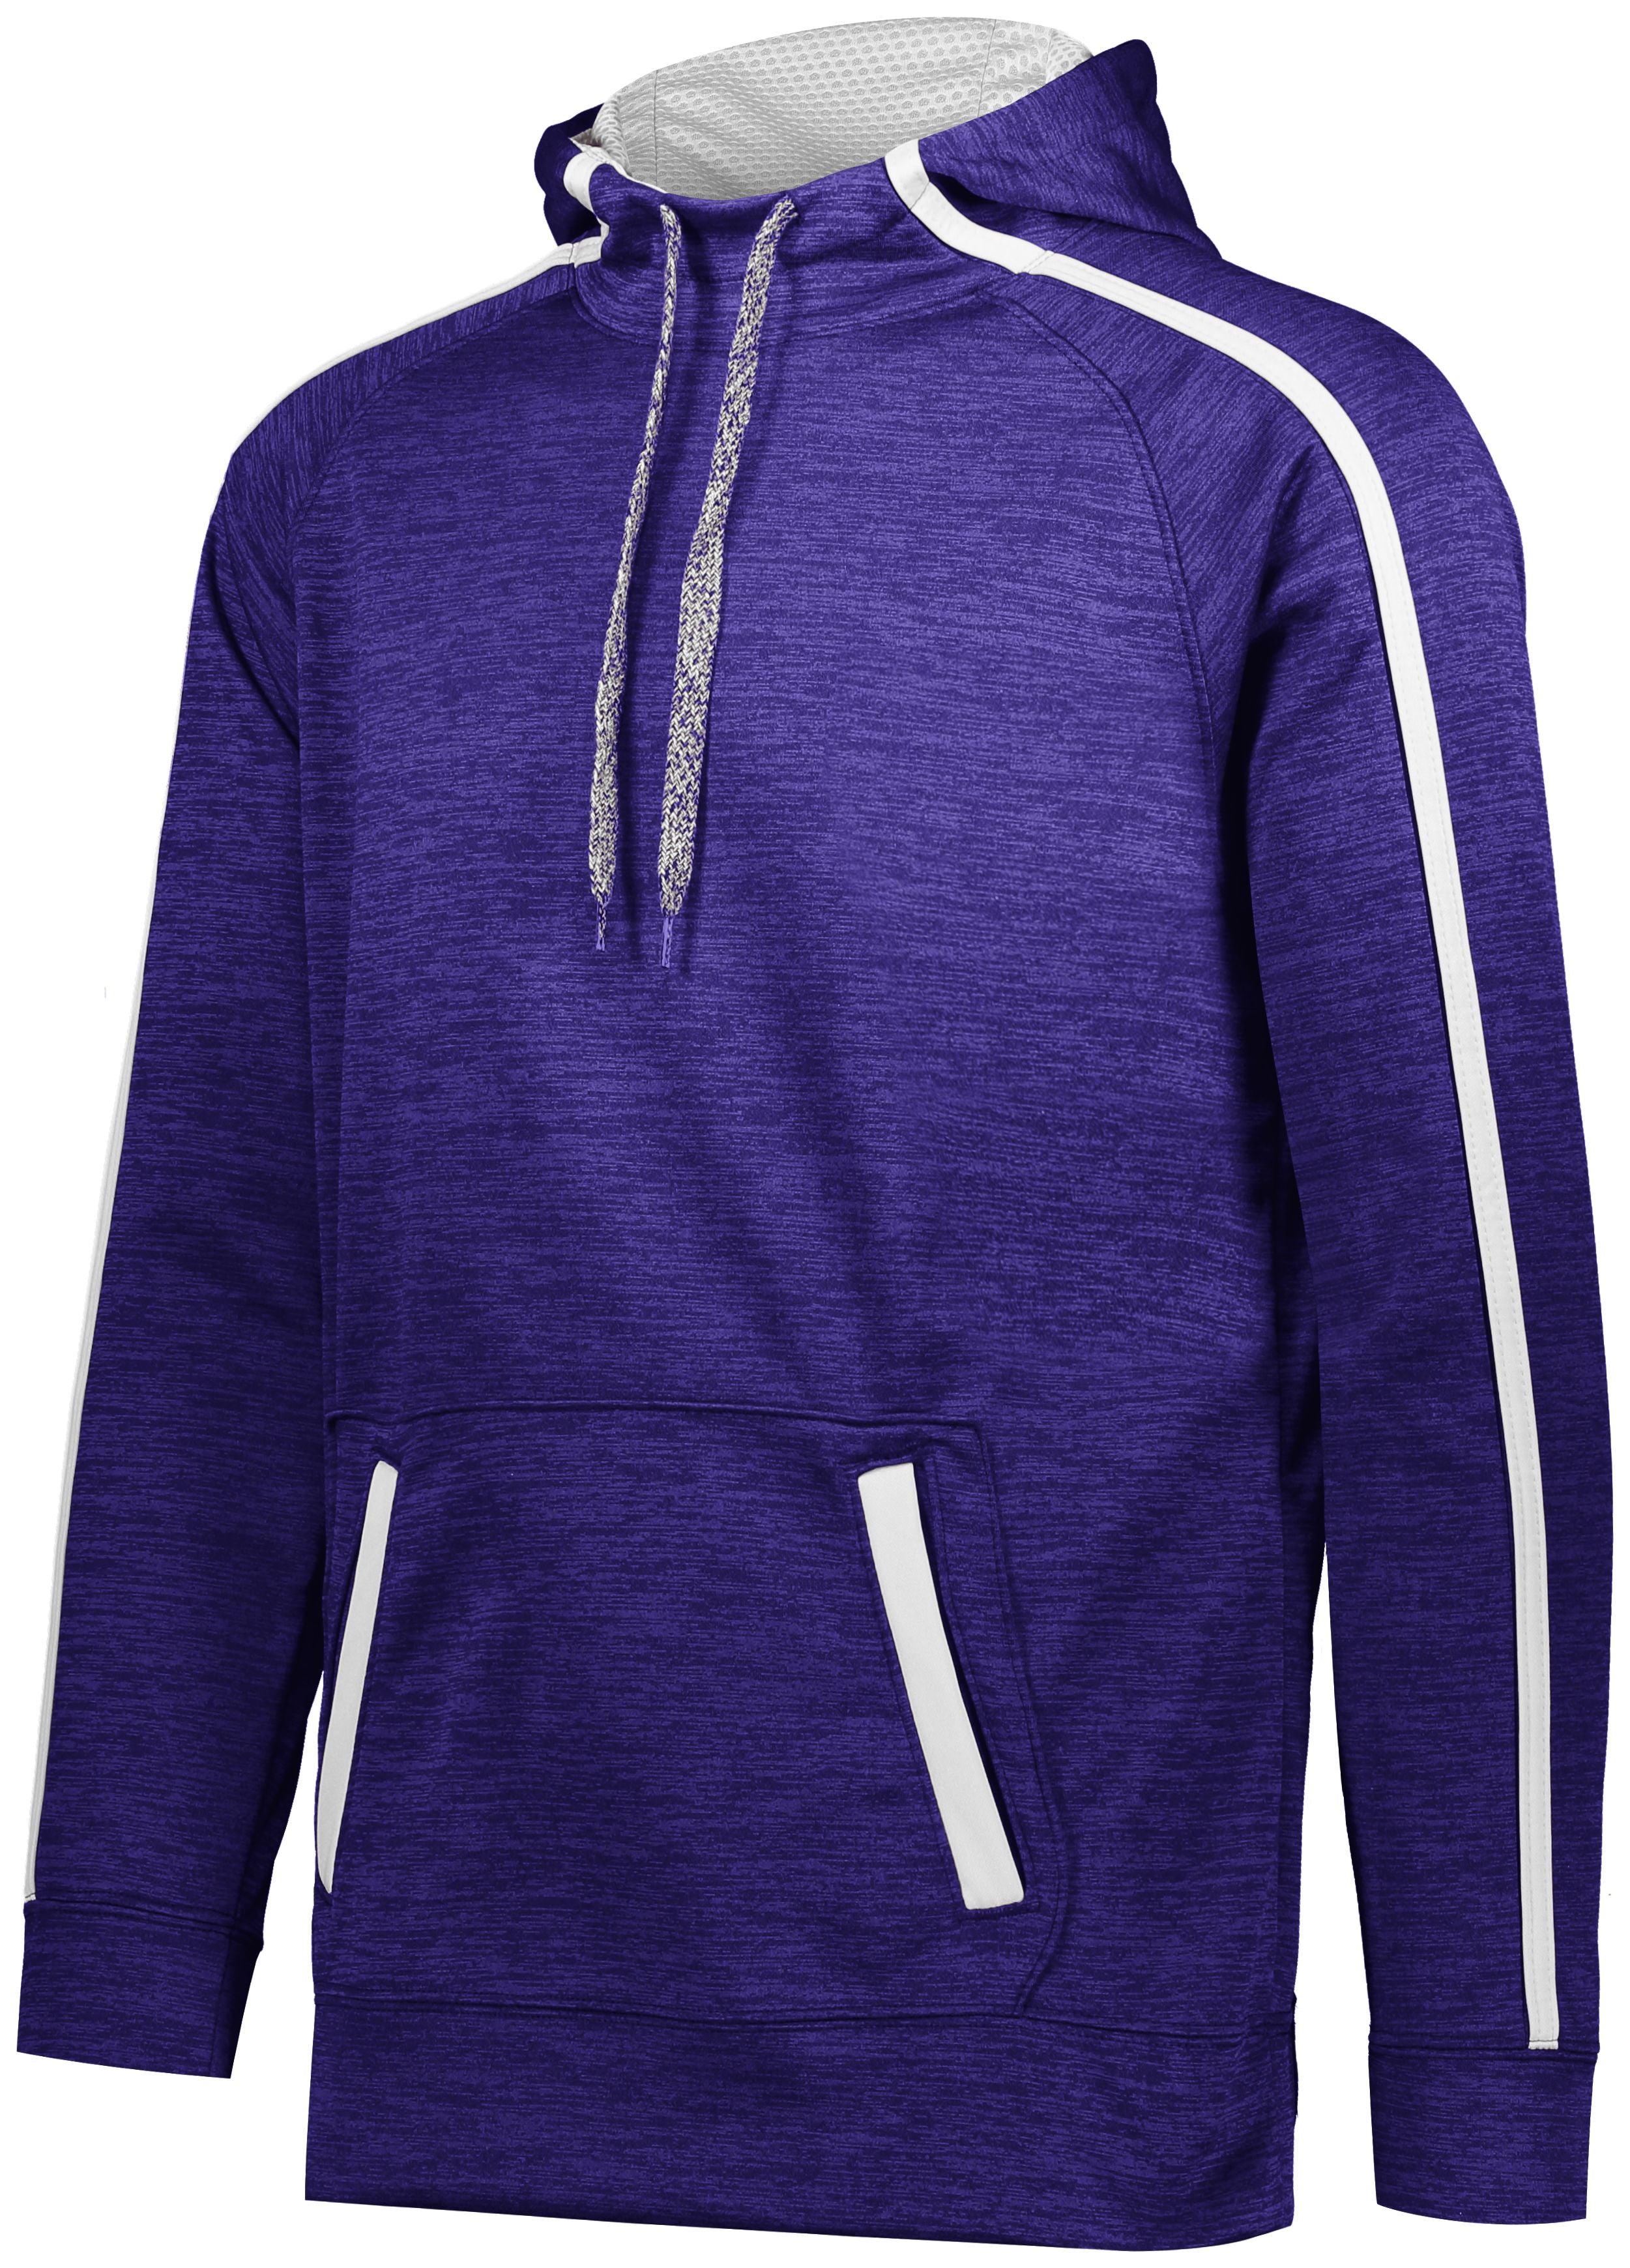 Augusta Sportswear Stoked Tonal Heather Hoodie in Purple/White  -Part of the Adult, Augusta-Products, Shirts, Tonal-Fleece-Collection product lines at KanaleyCreations.com